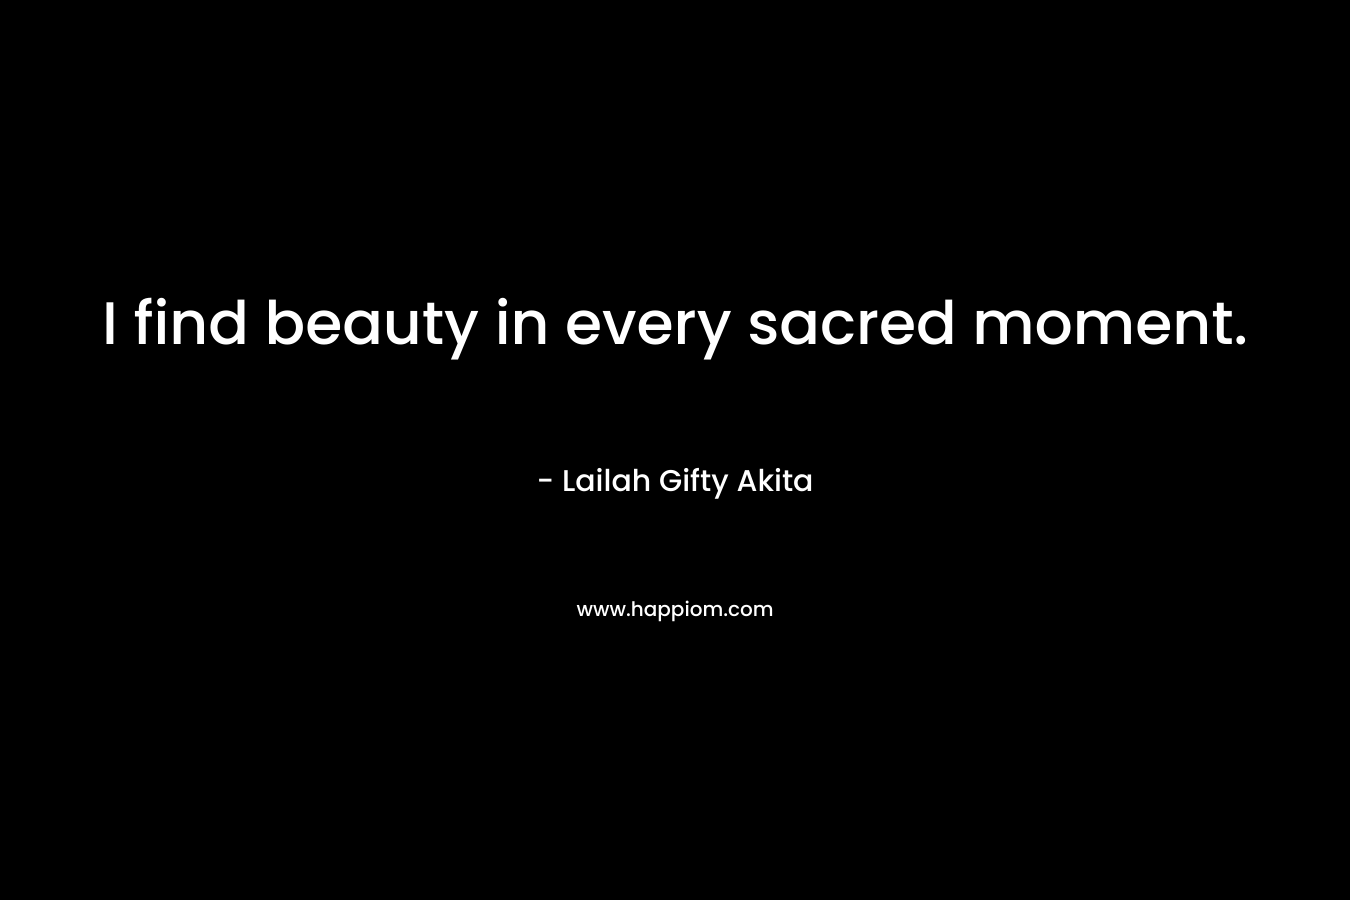 I find beauty in every sacred moment.